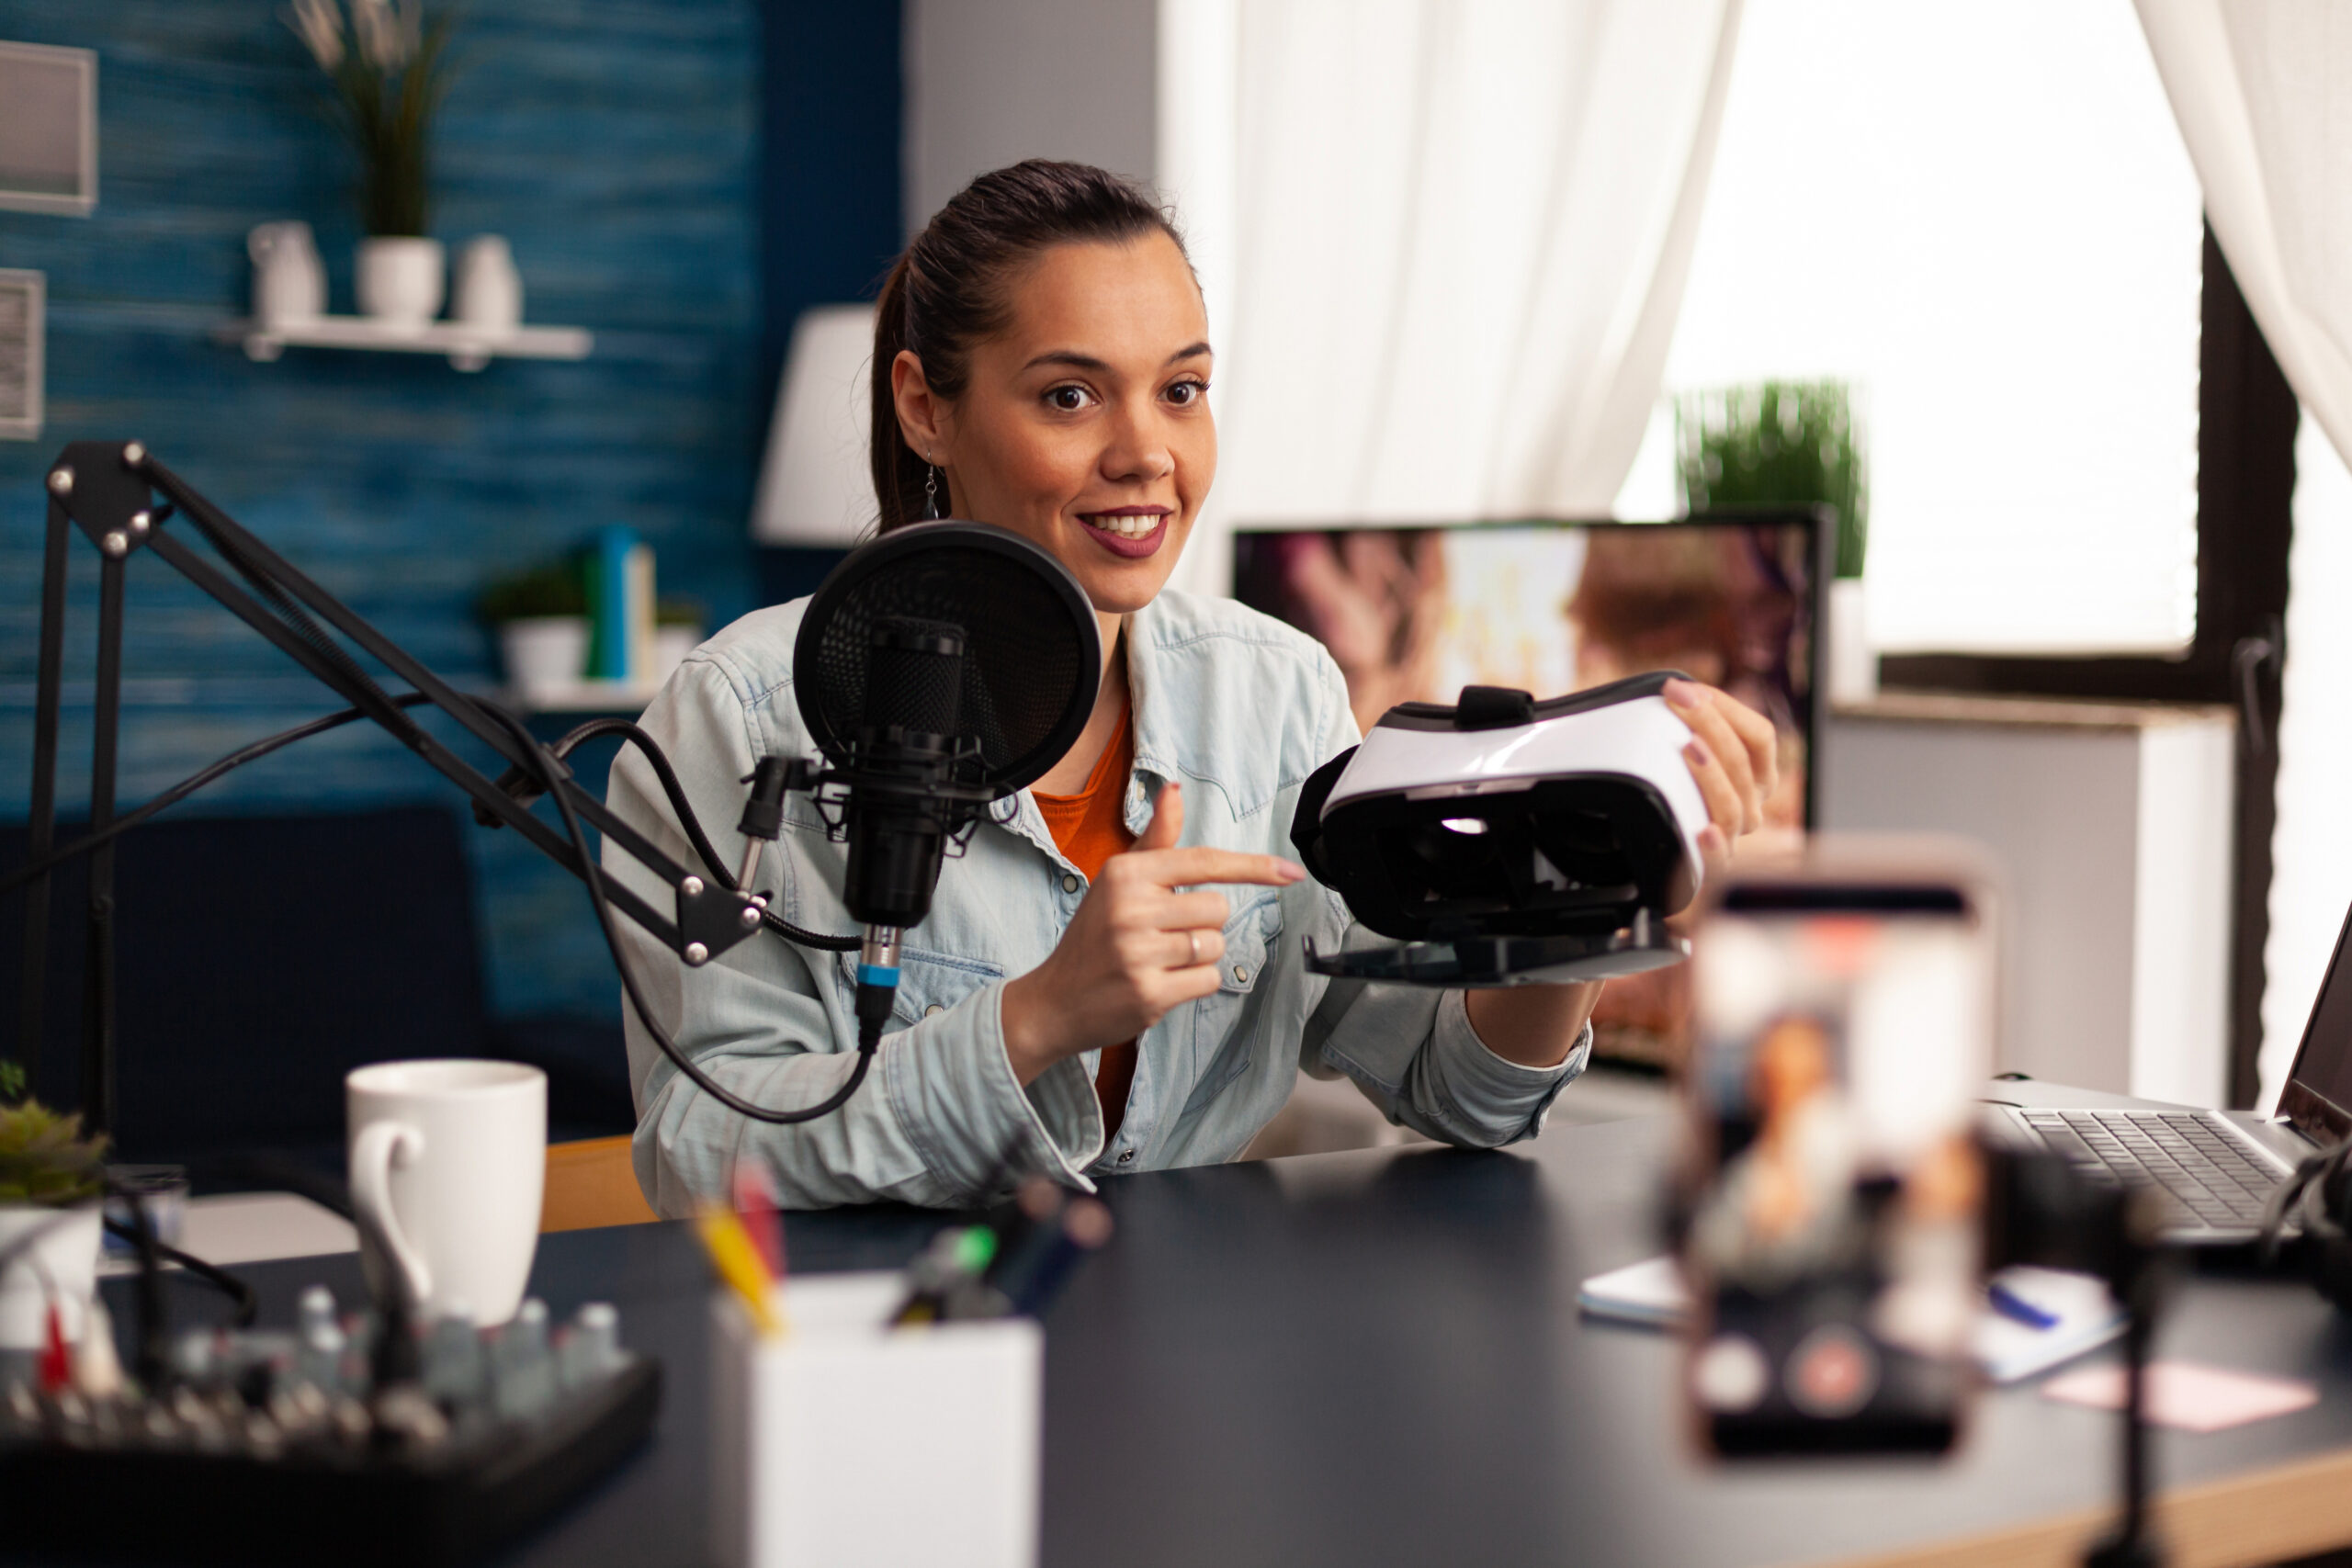 New media influencer smiling at camera while recording vr headphones review for followers. Creative vlogger making video blog concept speaking and looking at smartphone on tripod home studio podcast